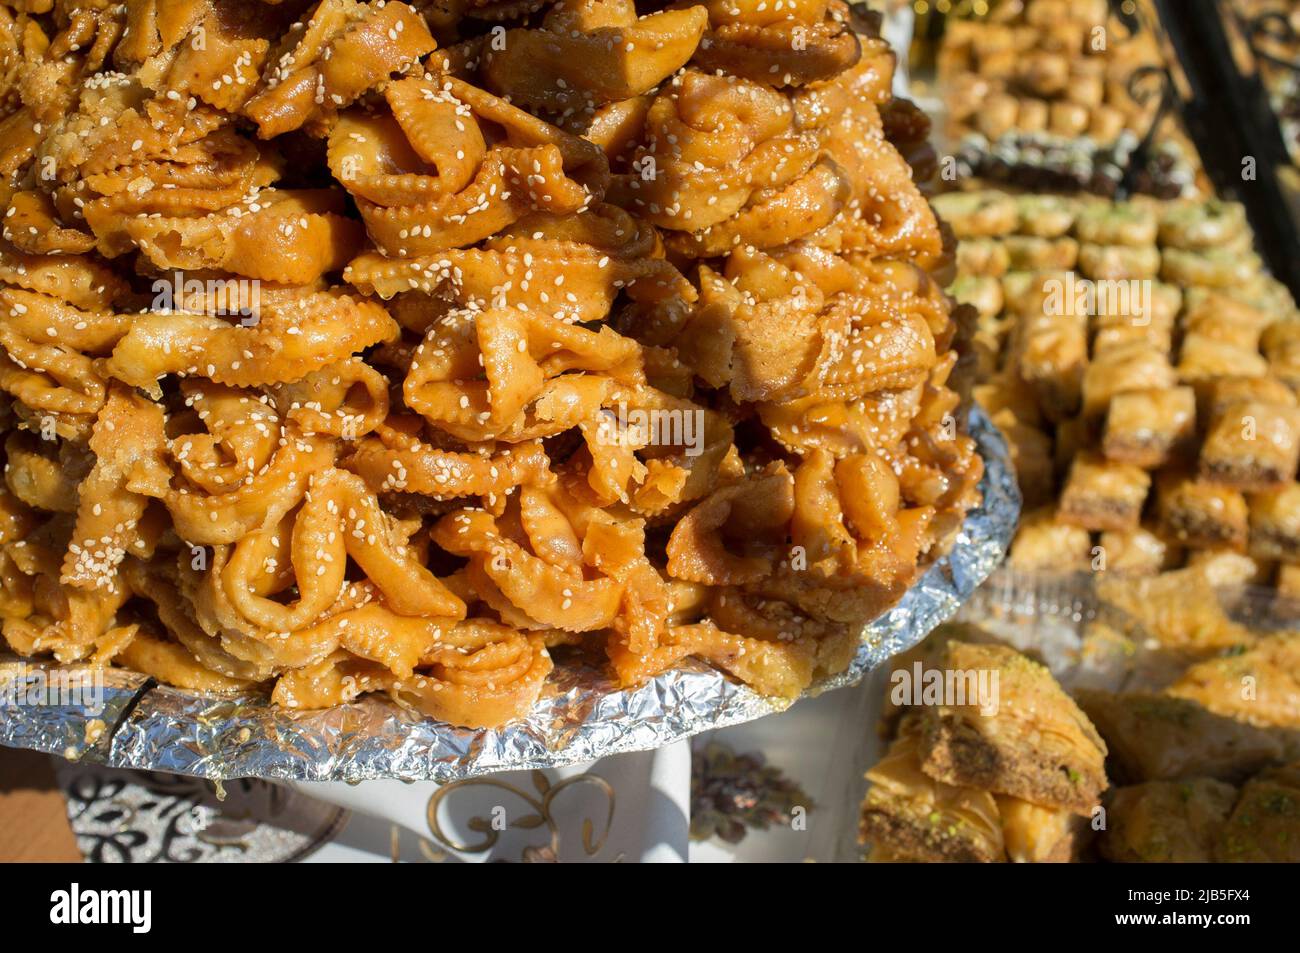 Platter crammed with chebakia. Deep-fried moroccan pastry. Stock Photo